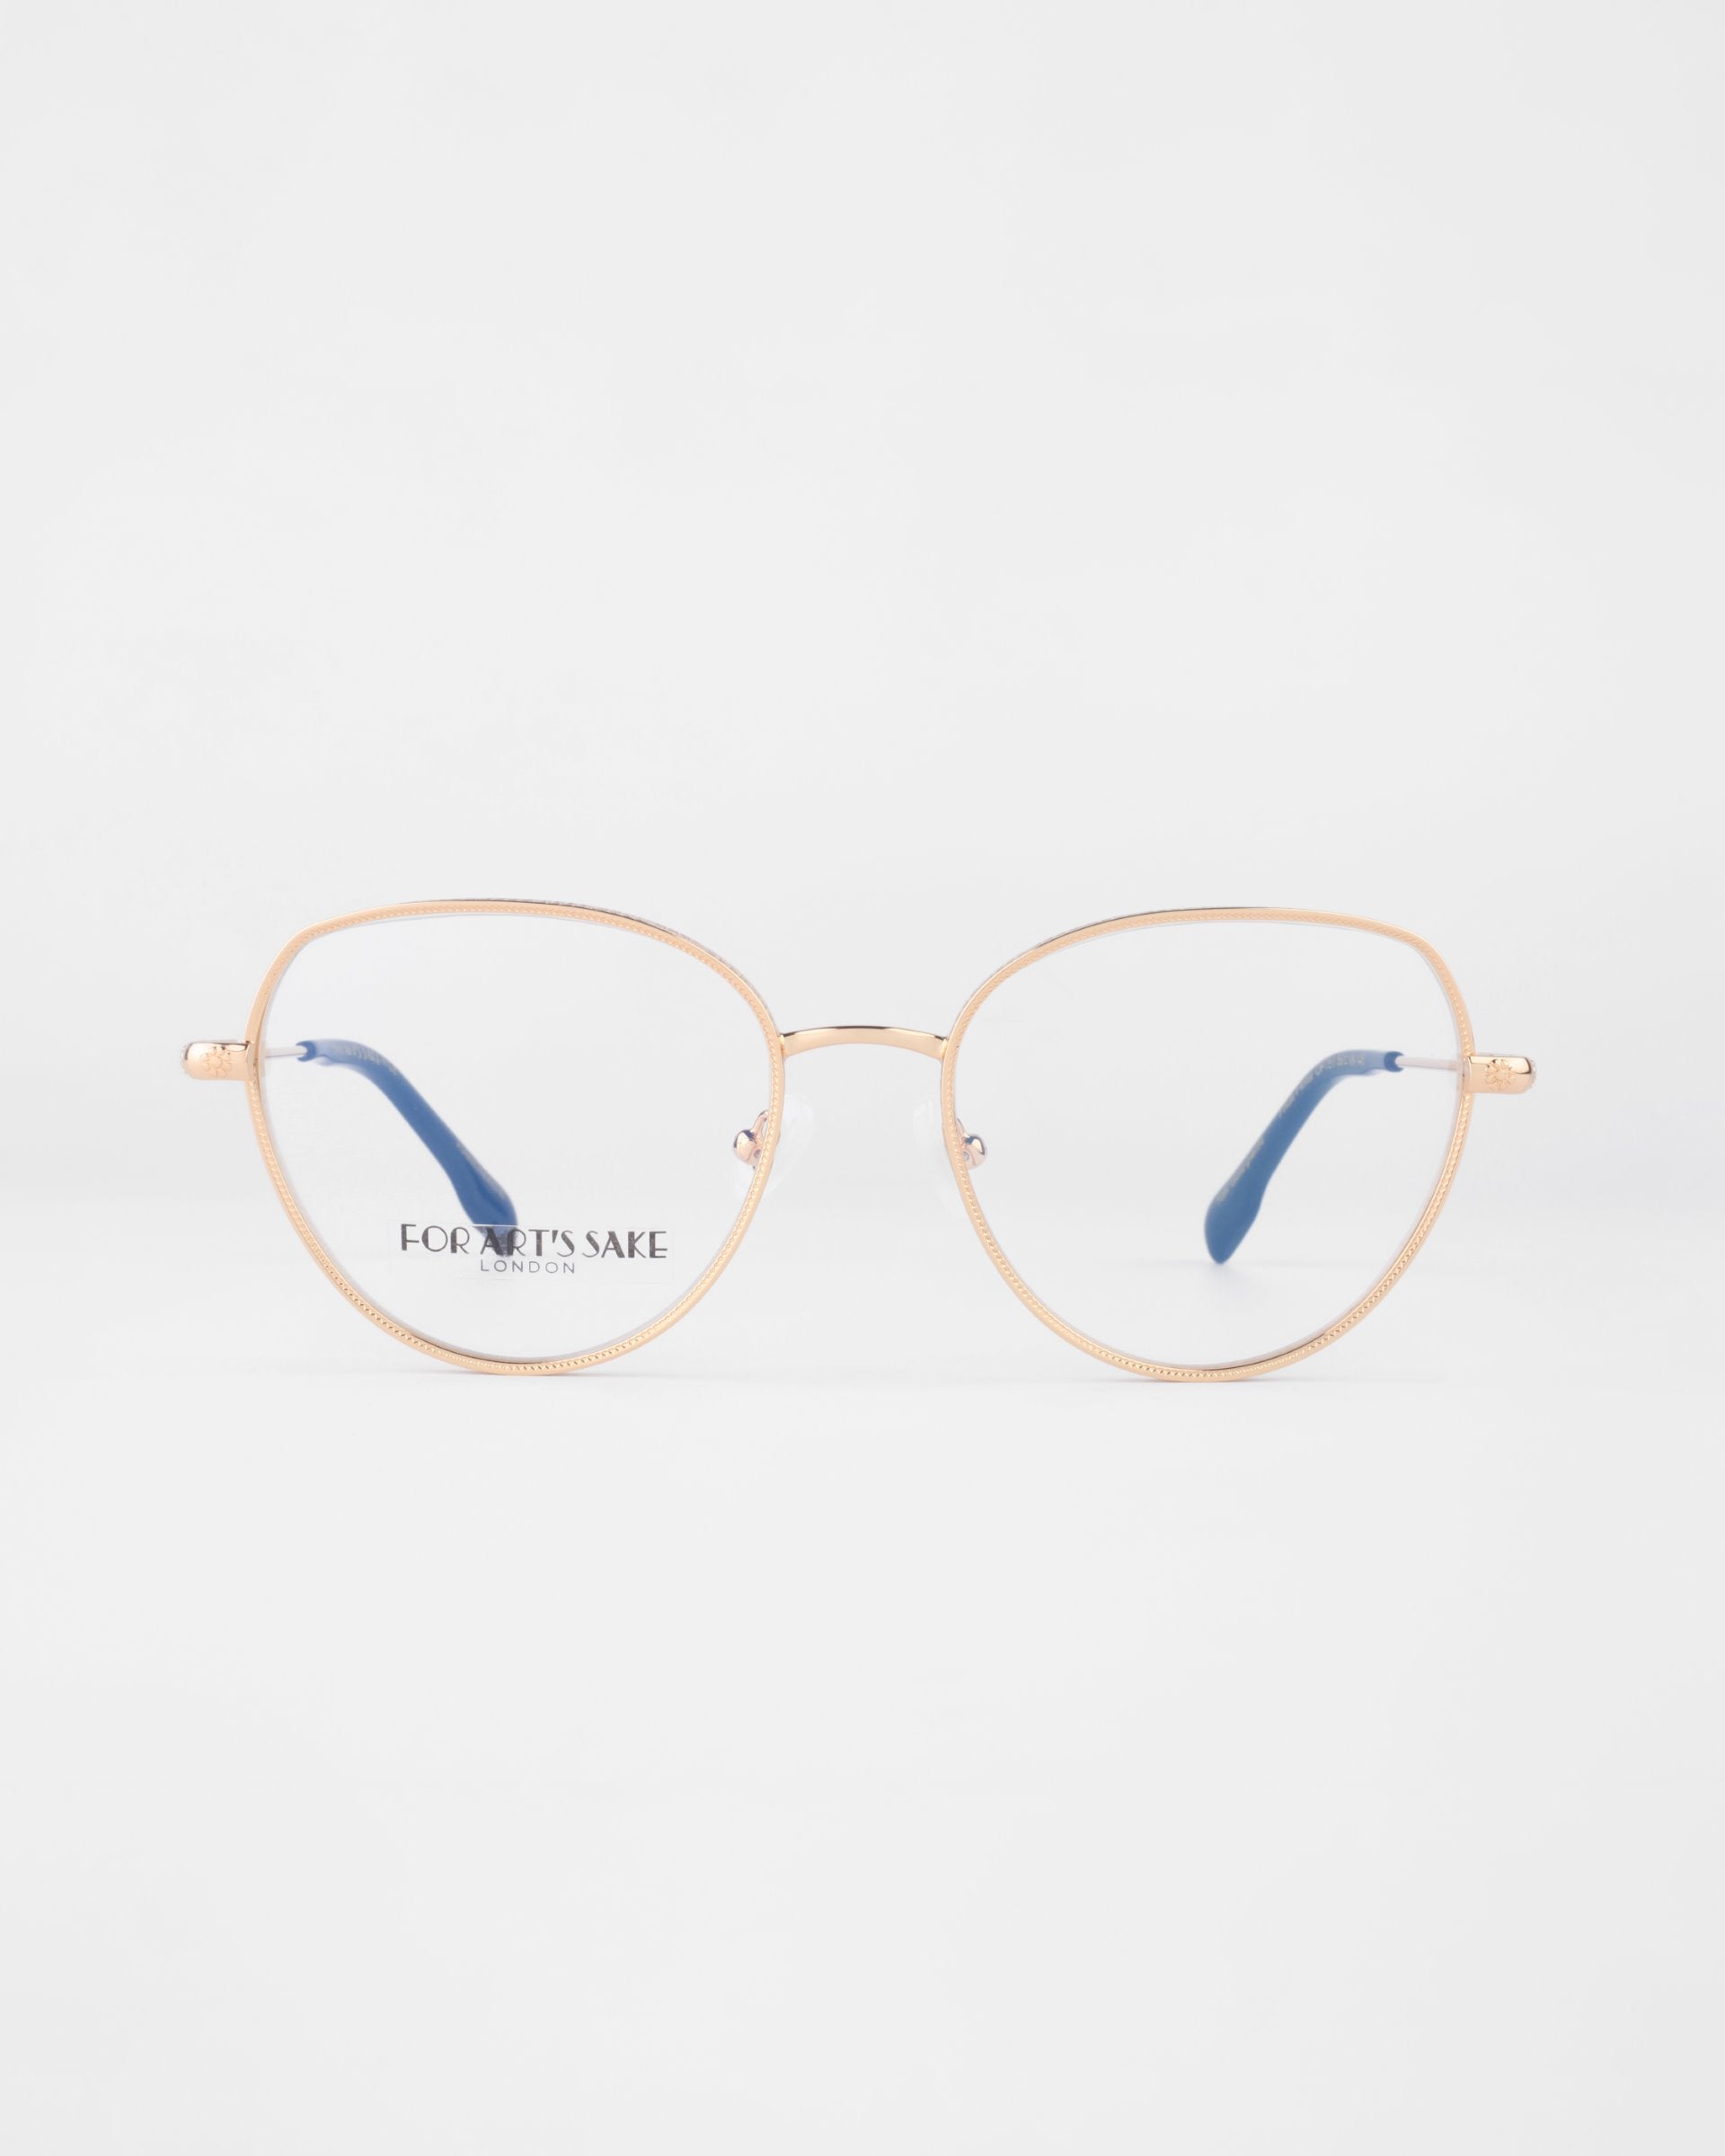 A pair of gold-framed eyeglasses with thin round prescription lenses and blue temple tips. The watermark text &quot;FOR ART&#39;S SAKE&quot; is visible on the left lens. The Frida Floral glasses from For Art&#39;s Sake®, fitted with a blue light filter, are set against a plain, light background.